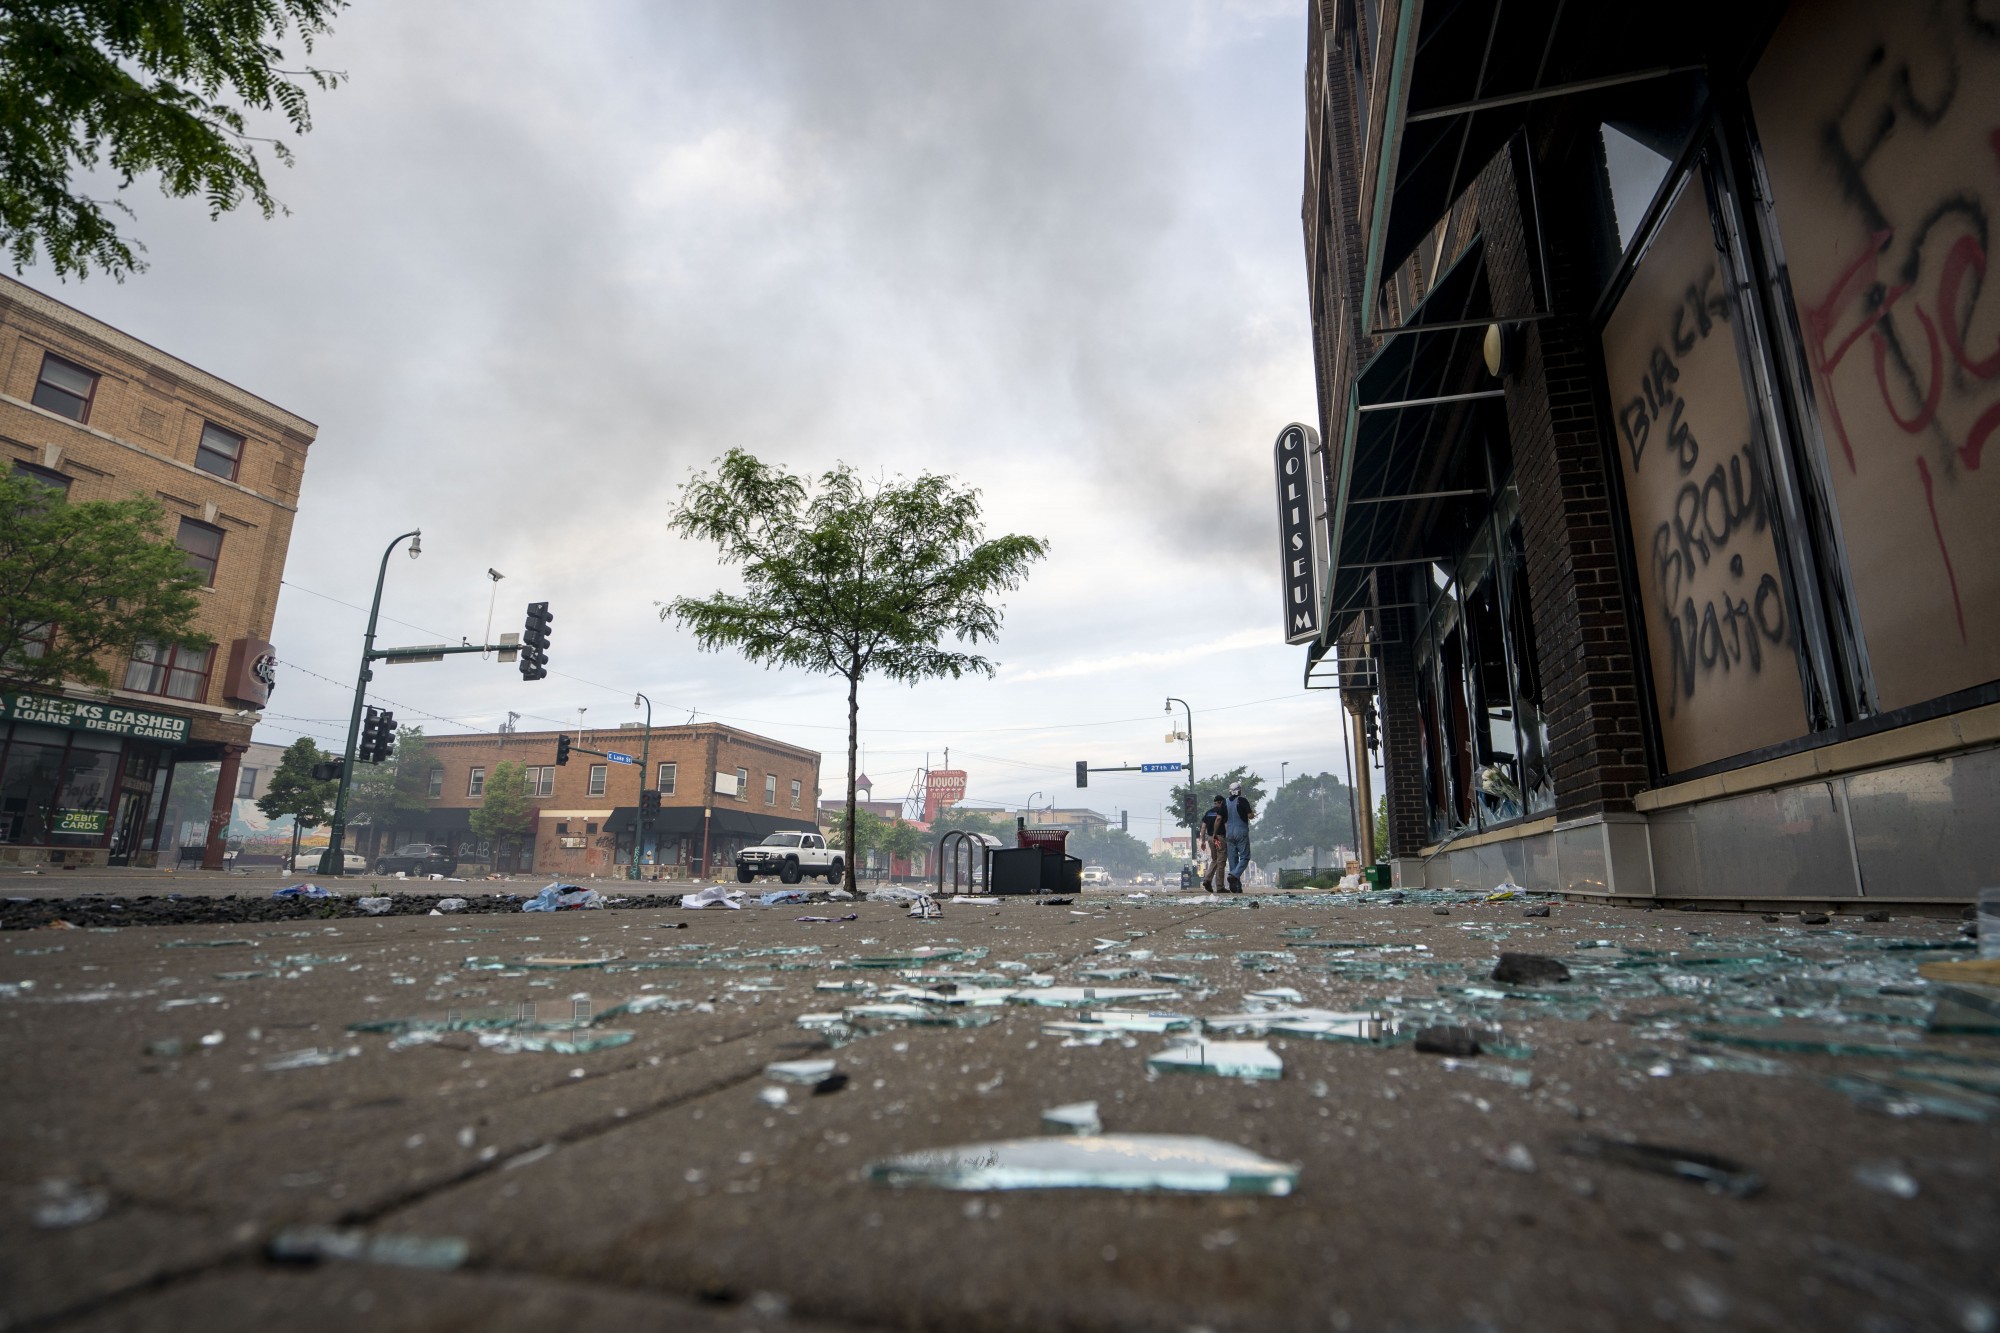 Broken glass litters the sidewalk on Lake Street the morning after a second night of protests that turned violent near the Minneapolis Police 3rd Precinct following the death of George Floyd. Dozens of businesses were vandalized and firefighters were still working to control several blazes still at hand on Thursday, May 28.